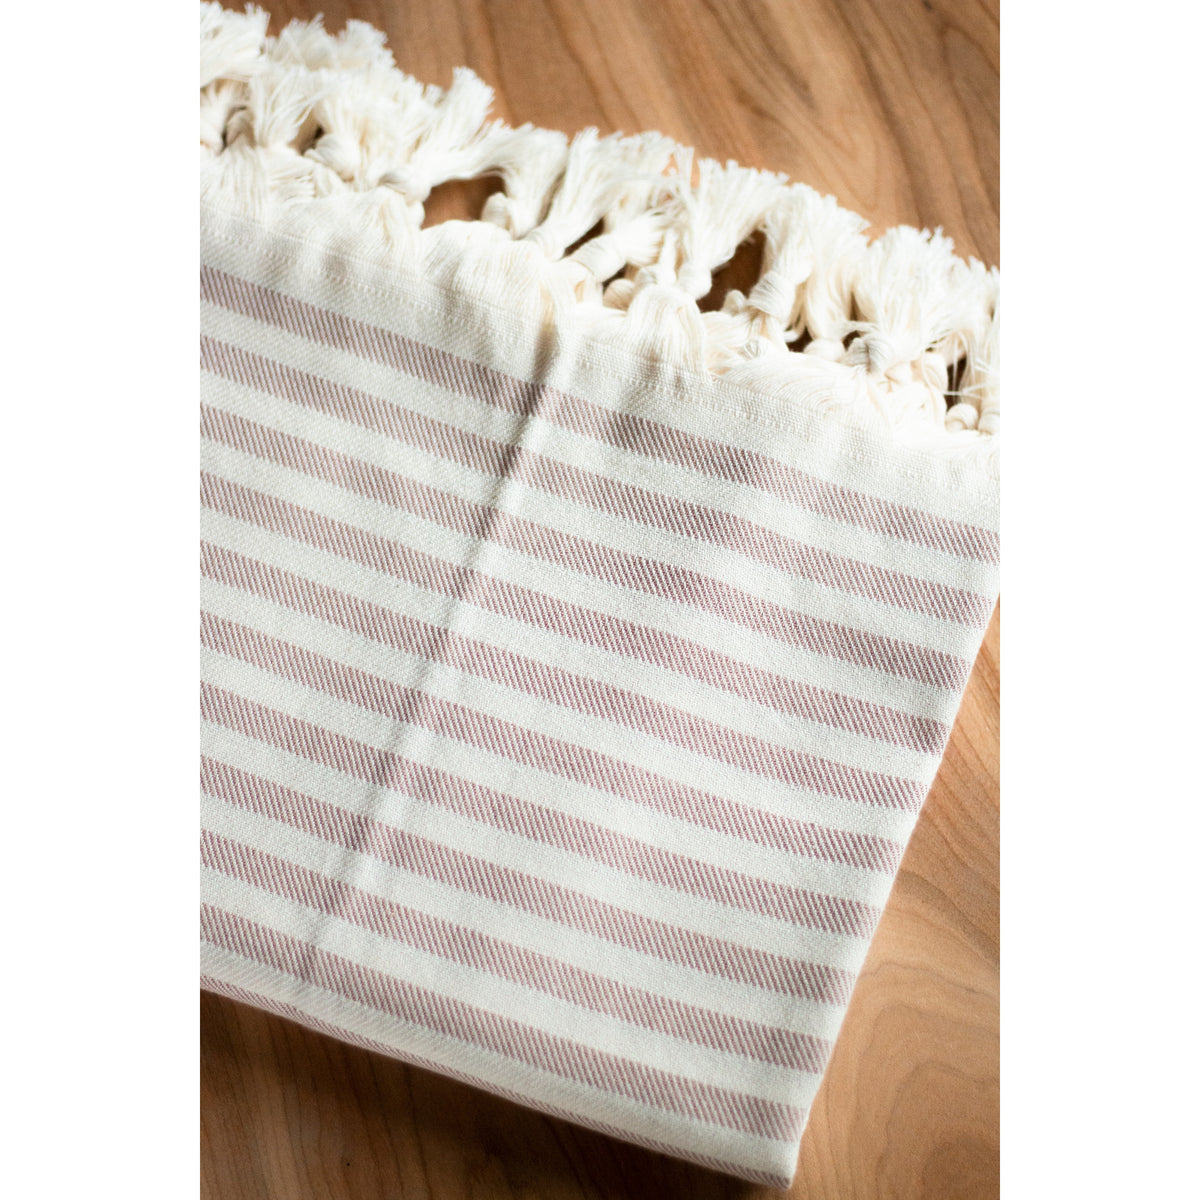 Oversized Turkish Bath and Beach Towels - Willow Stripe